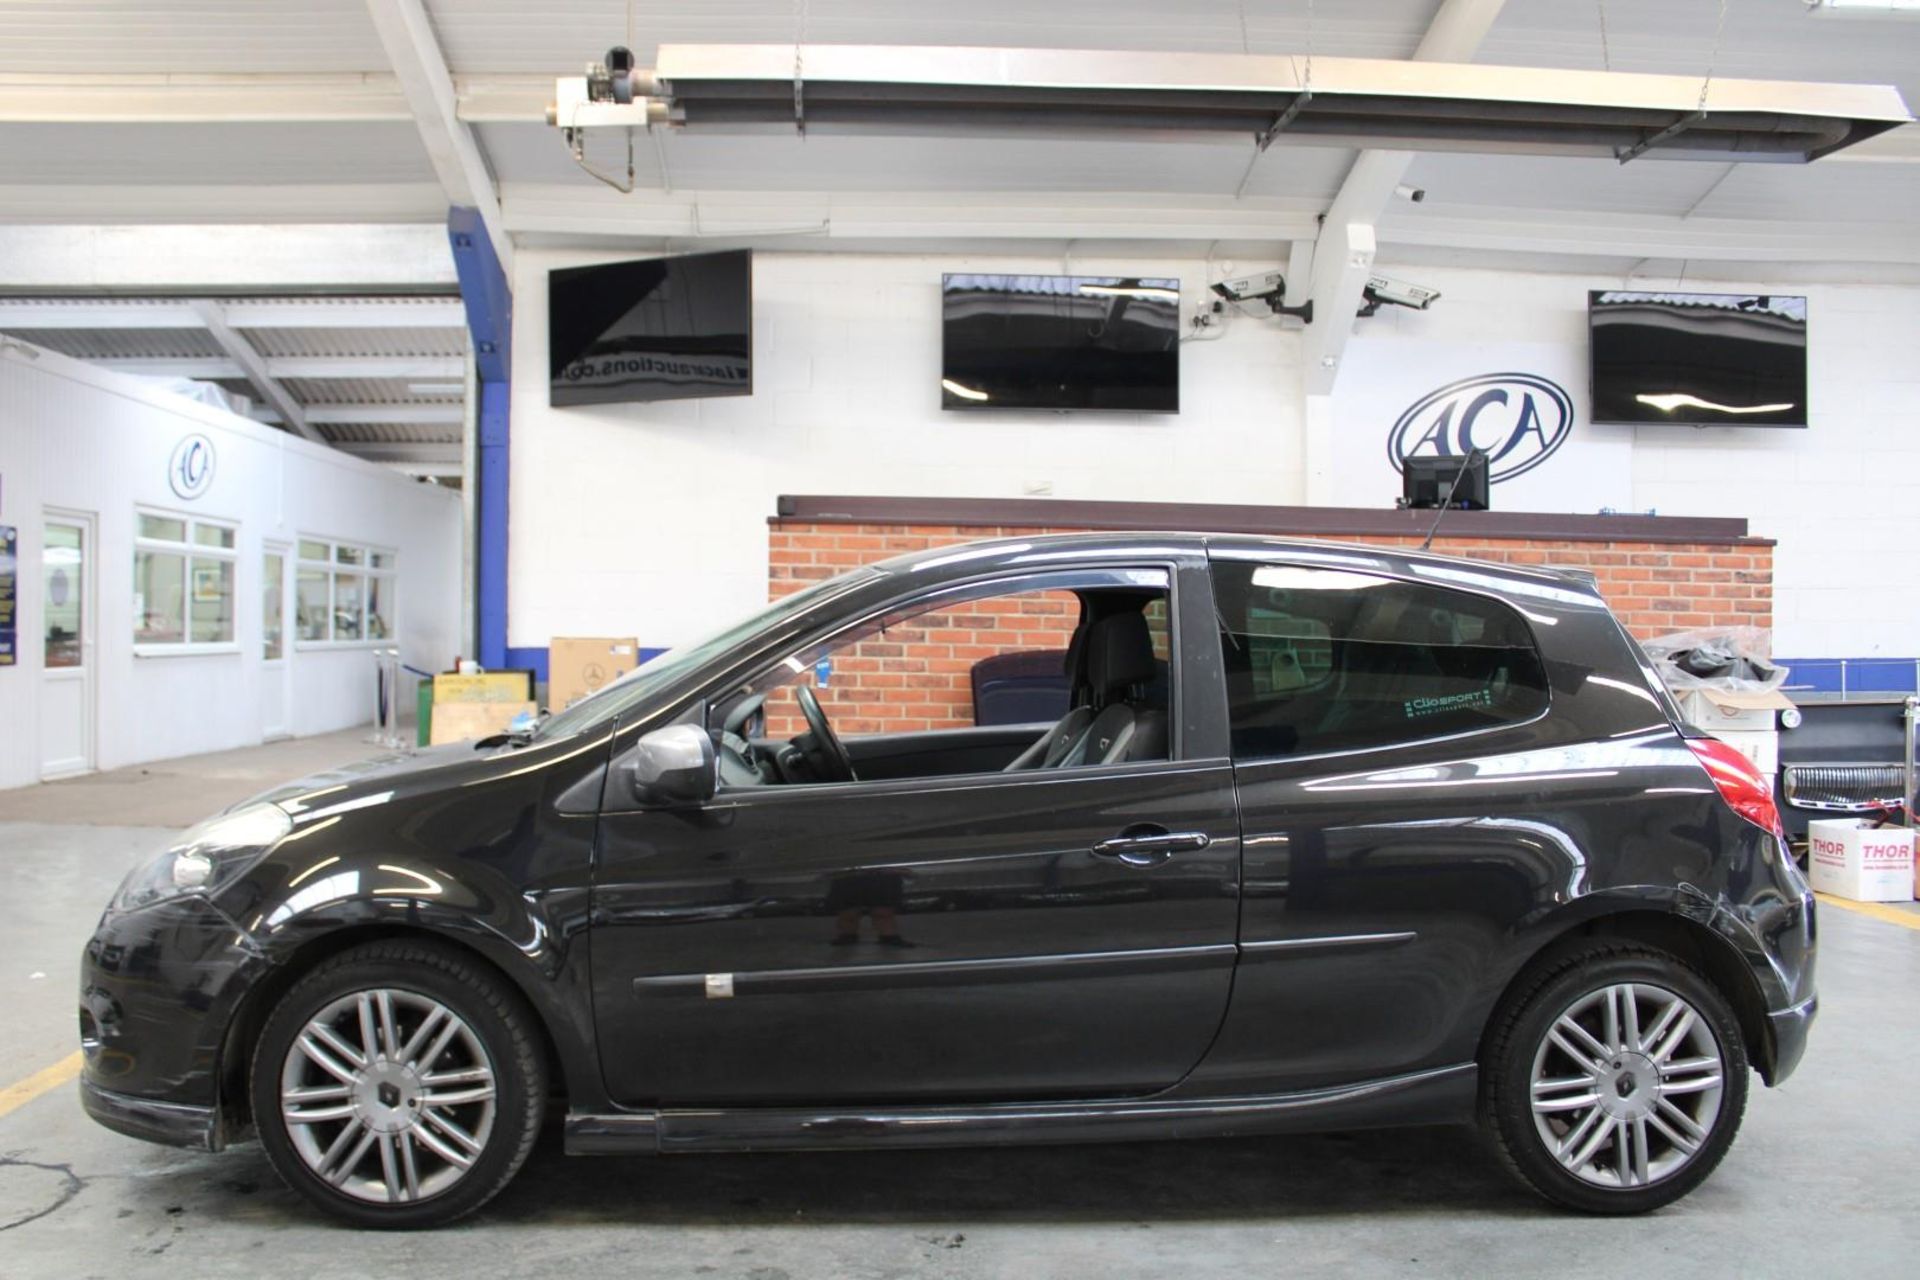 59 09 Renault Clio GT - Image 31 of 31